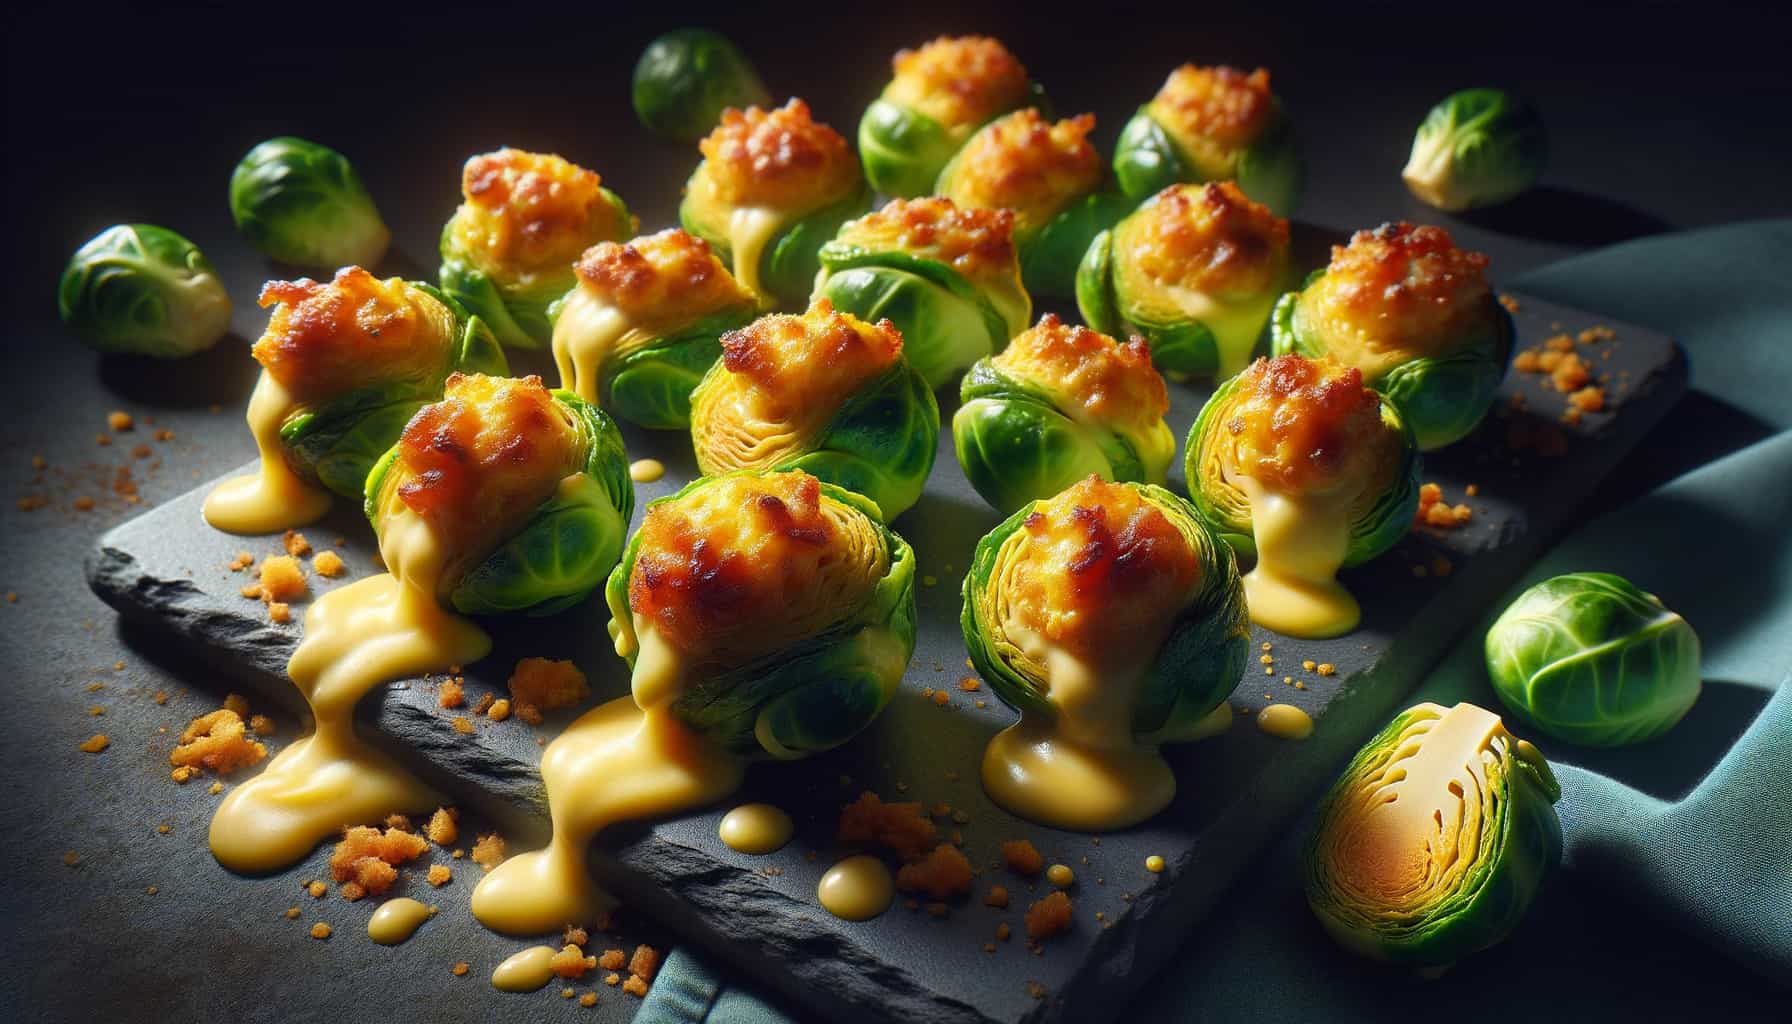 Keto cheese-stuffed brussels sprouts arranged neatly on a slate serving board. The brussels sprouts have a crisp exterior and ooze with creamy cheese from within.